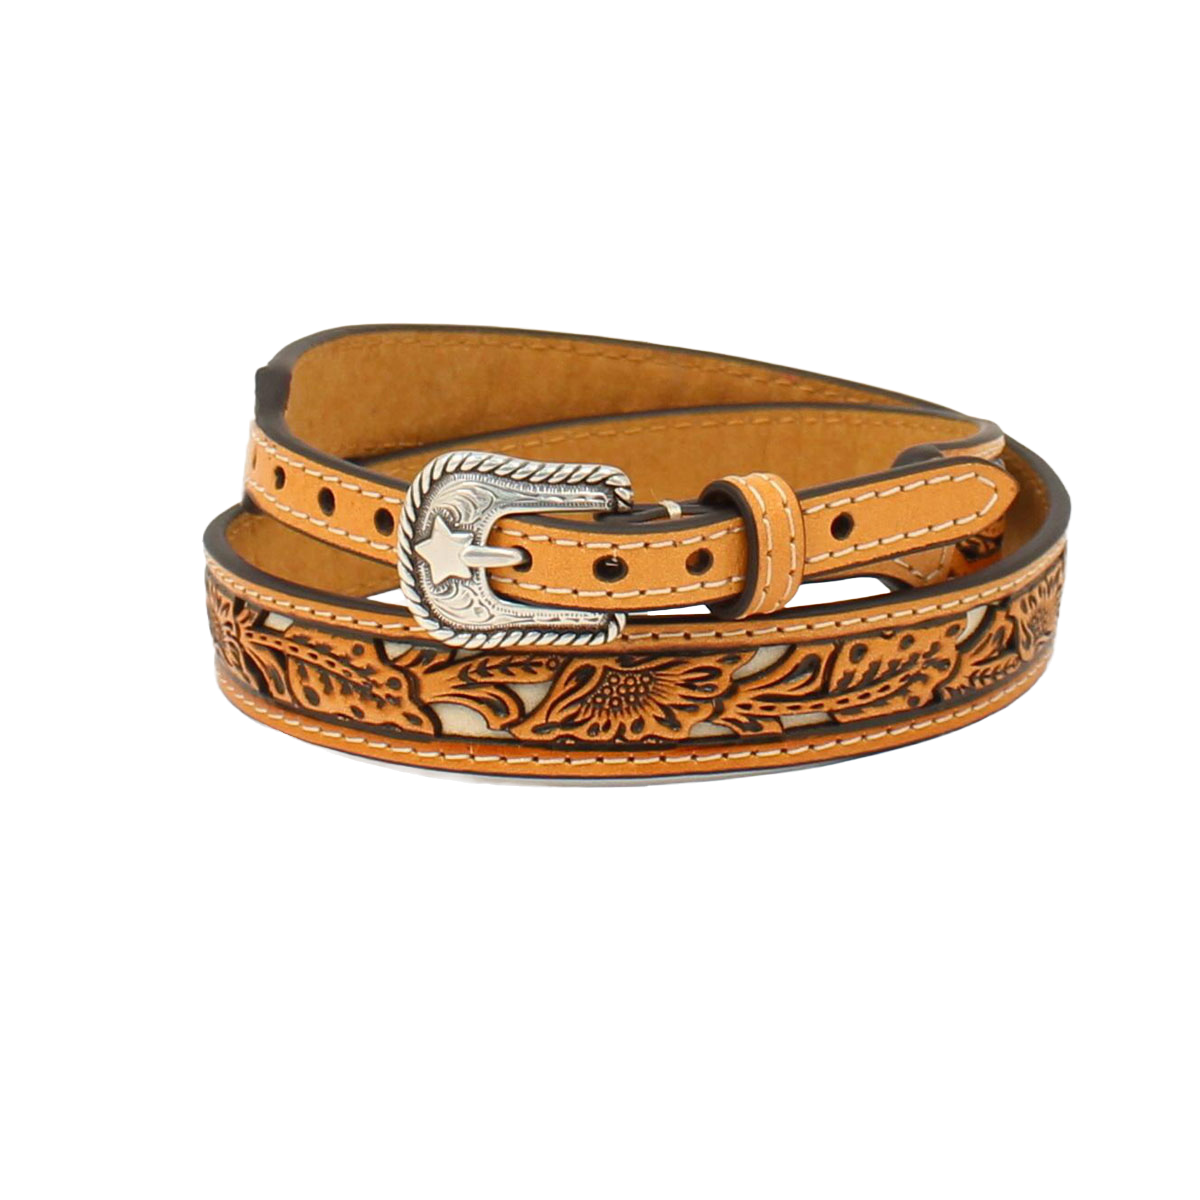 Twister Floral Tooled Leather Hatband 0275205 – Wild West Boot Store